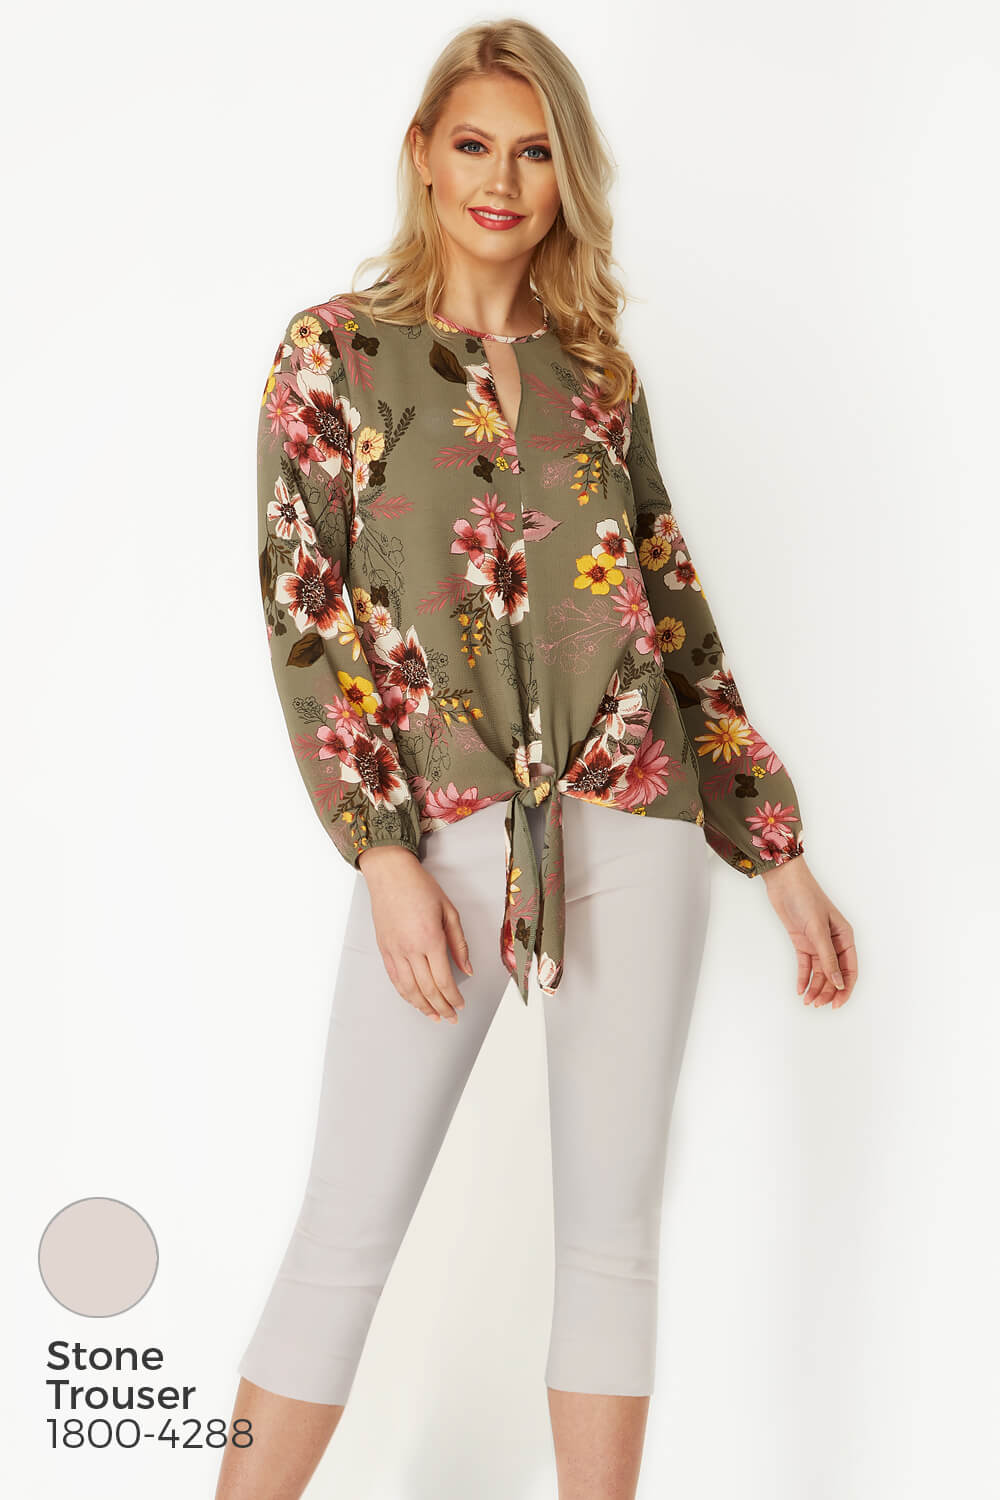 KHAKI Floral Tie Front Top, Image 5 of 8